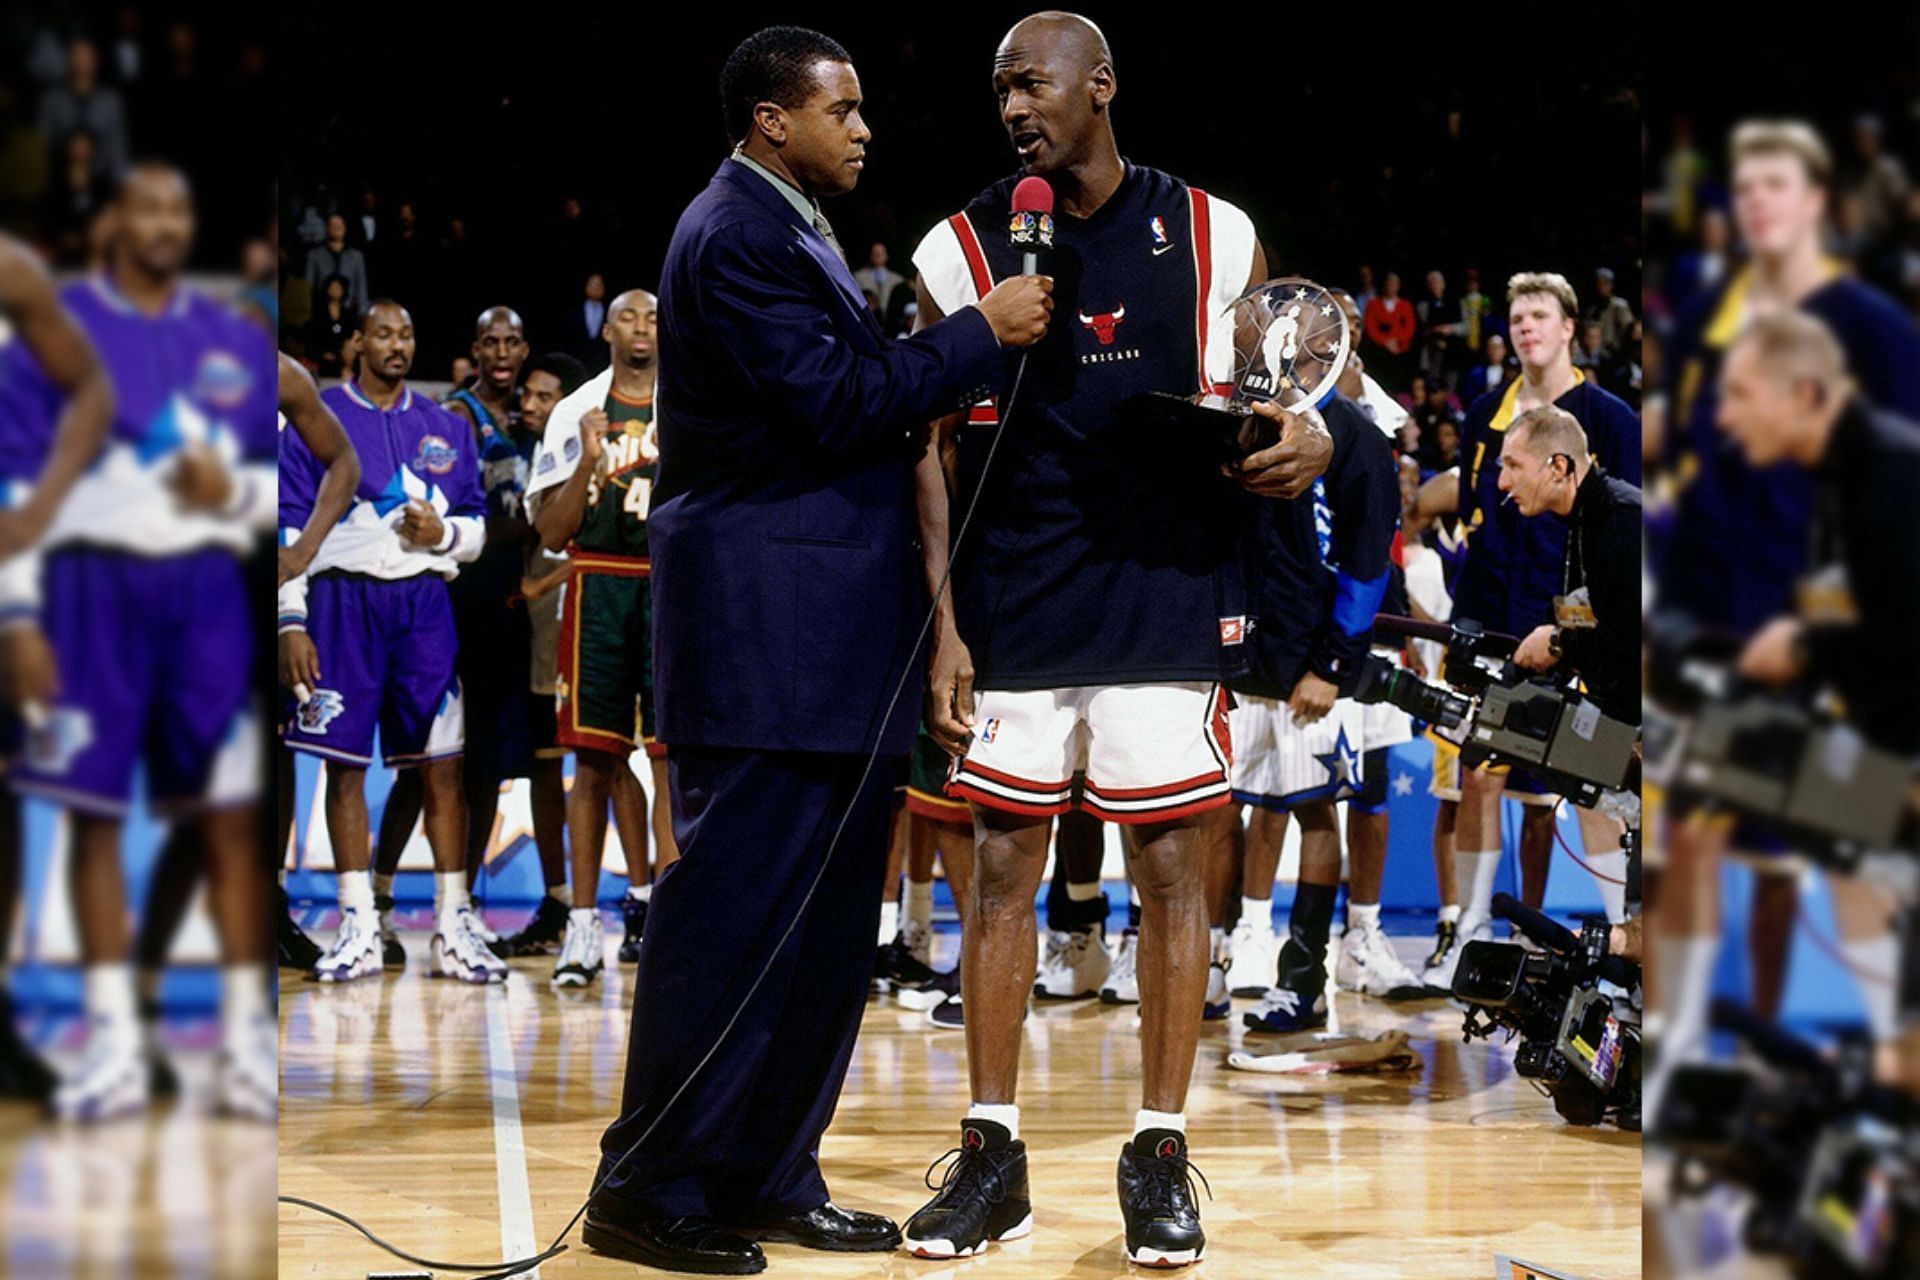 MJ wore the Playoff colorway in the NBA All-Star game of 1998 (Image via Sole Retriever)